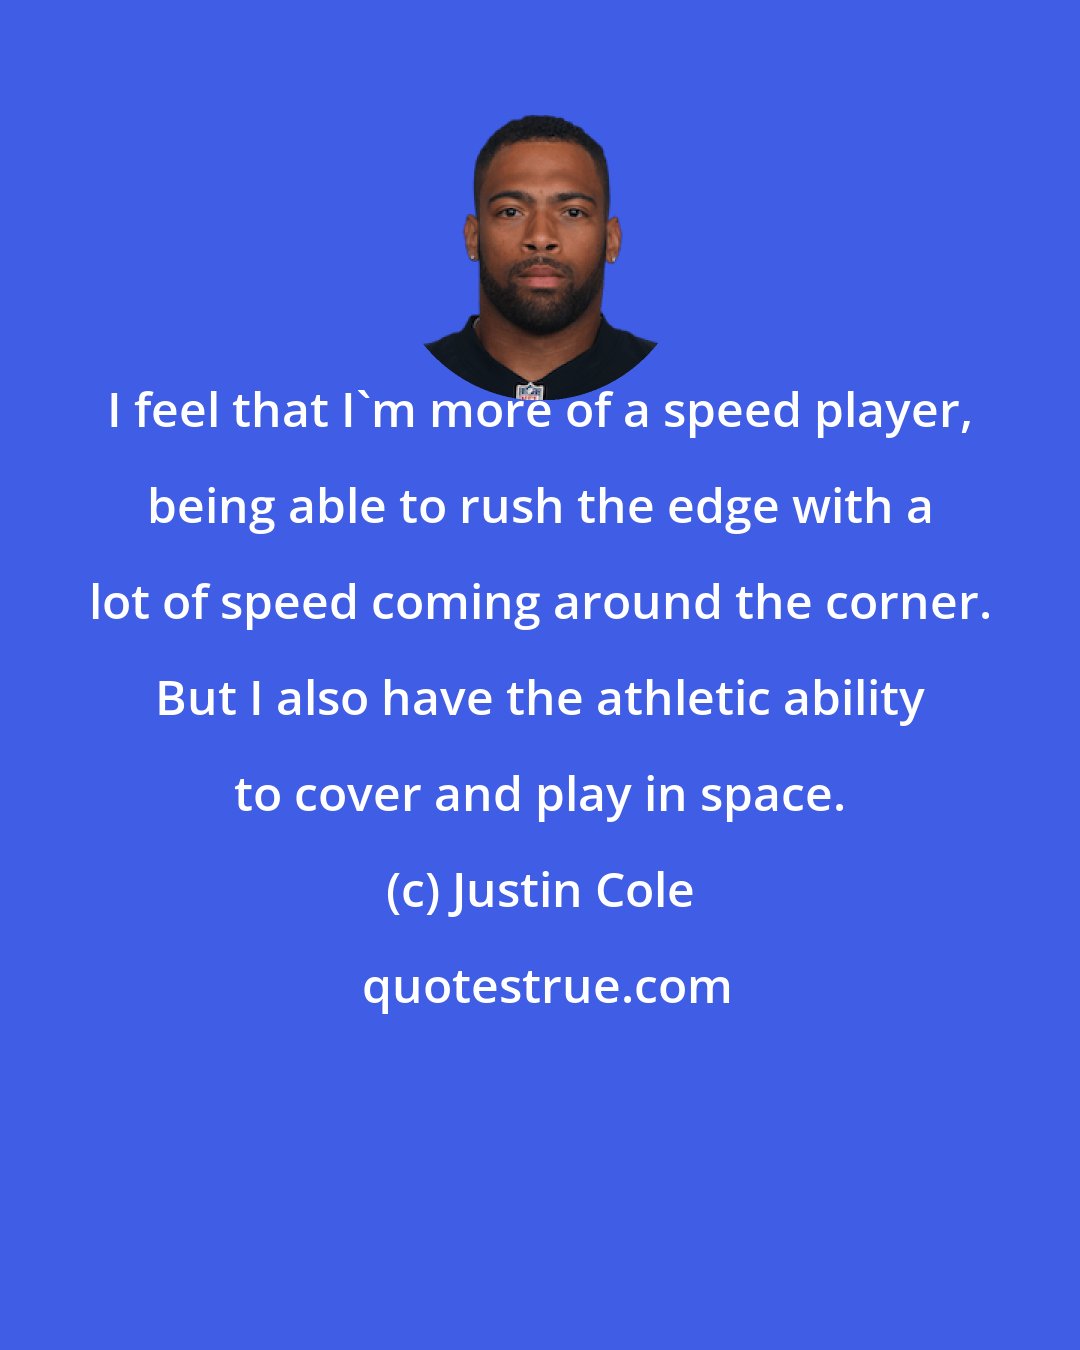 Justin Cole: I feel that I'm more of a speed player, being able to rush the edge with a lot of speed coming around the corner. But I also have the athletic ability to cover and play in space.